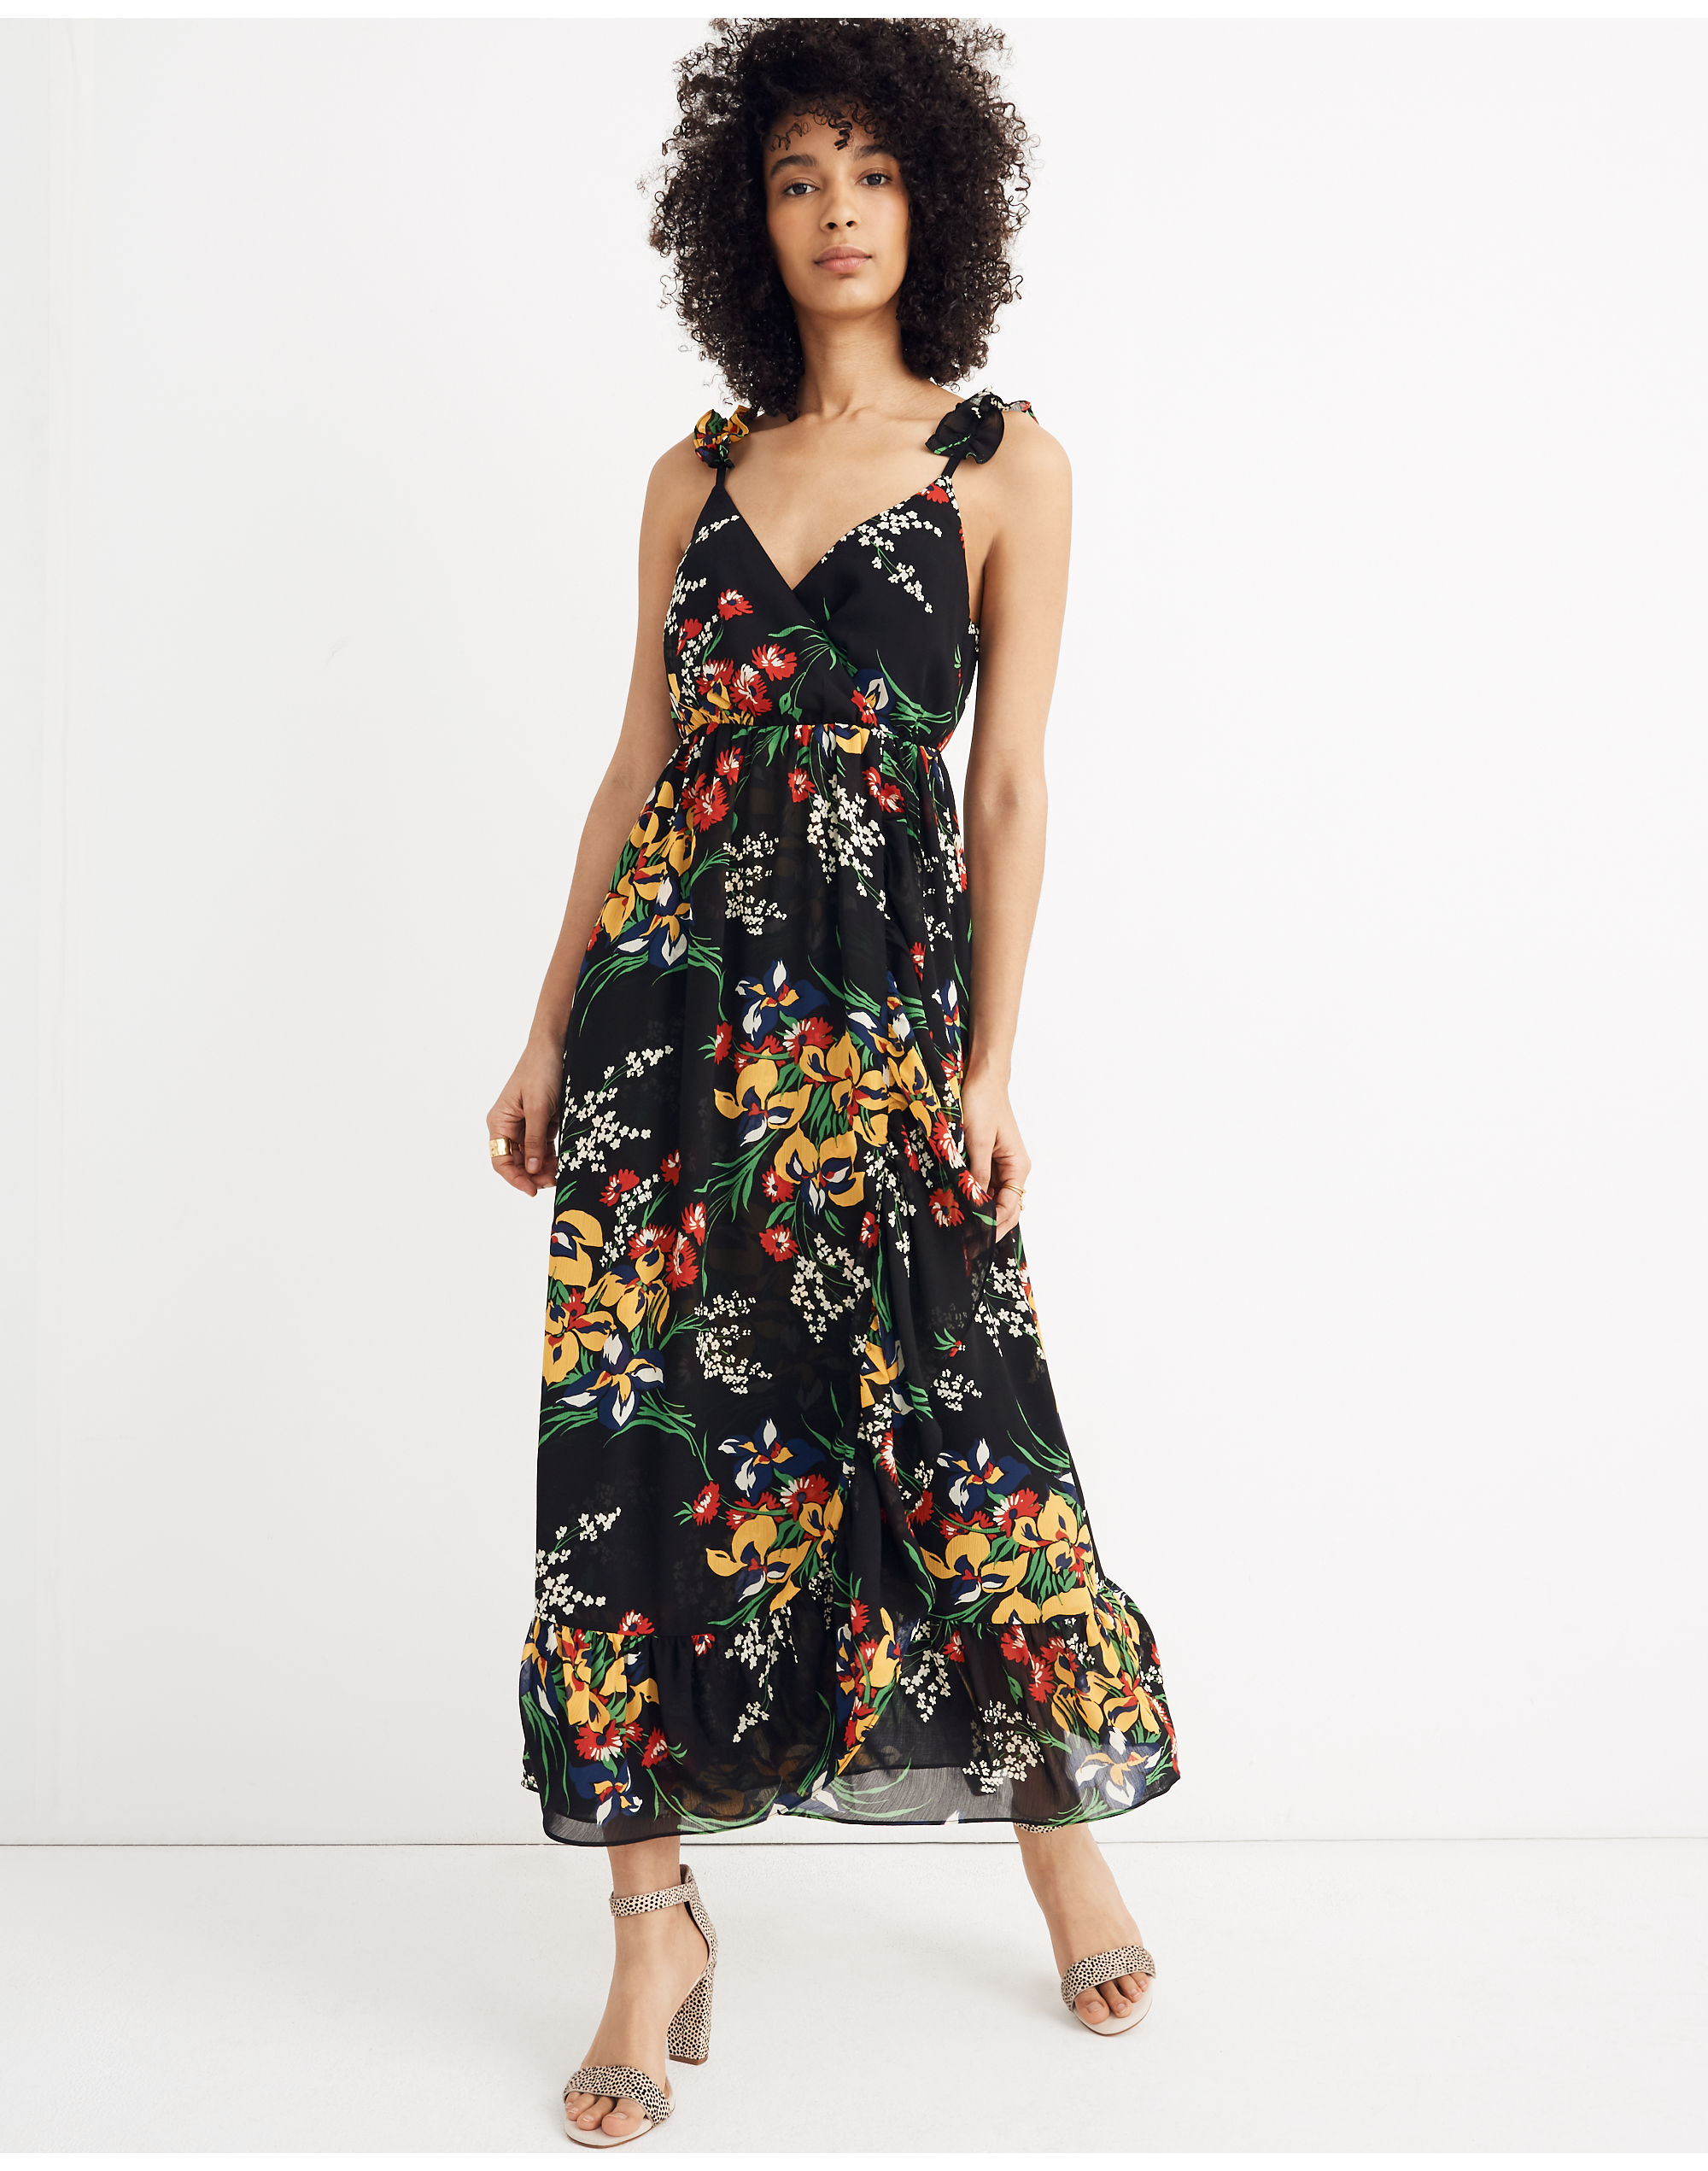 A Madewell Floral Jumpsuit To Wear In NYC - an indigo day